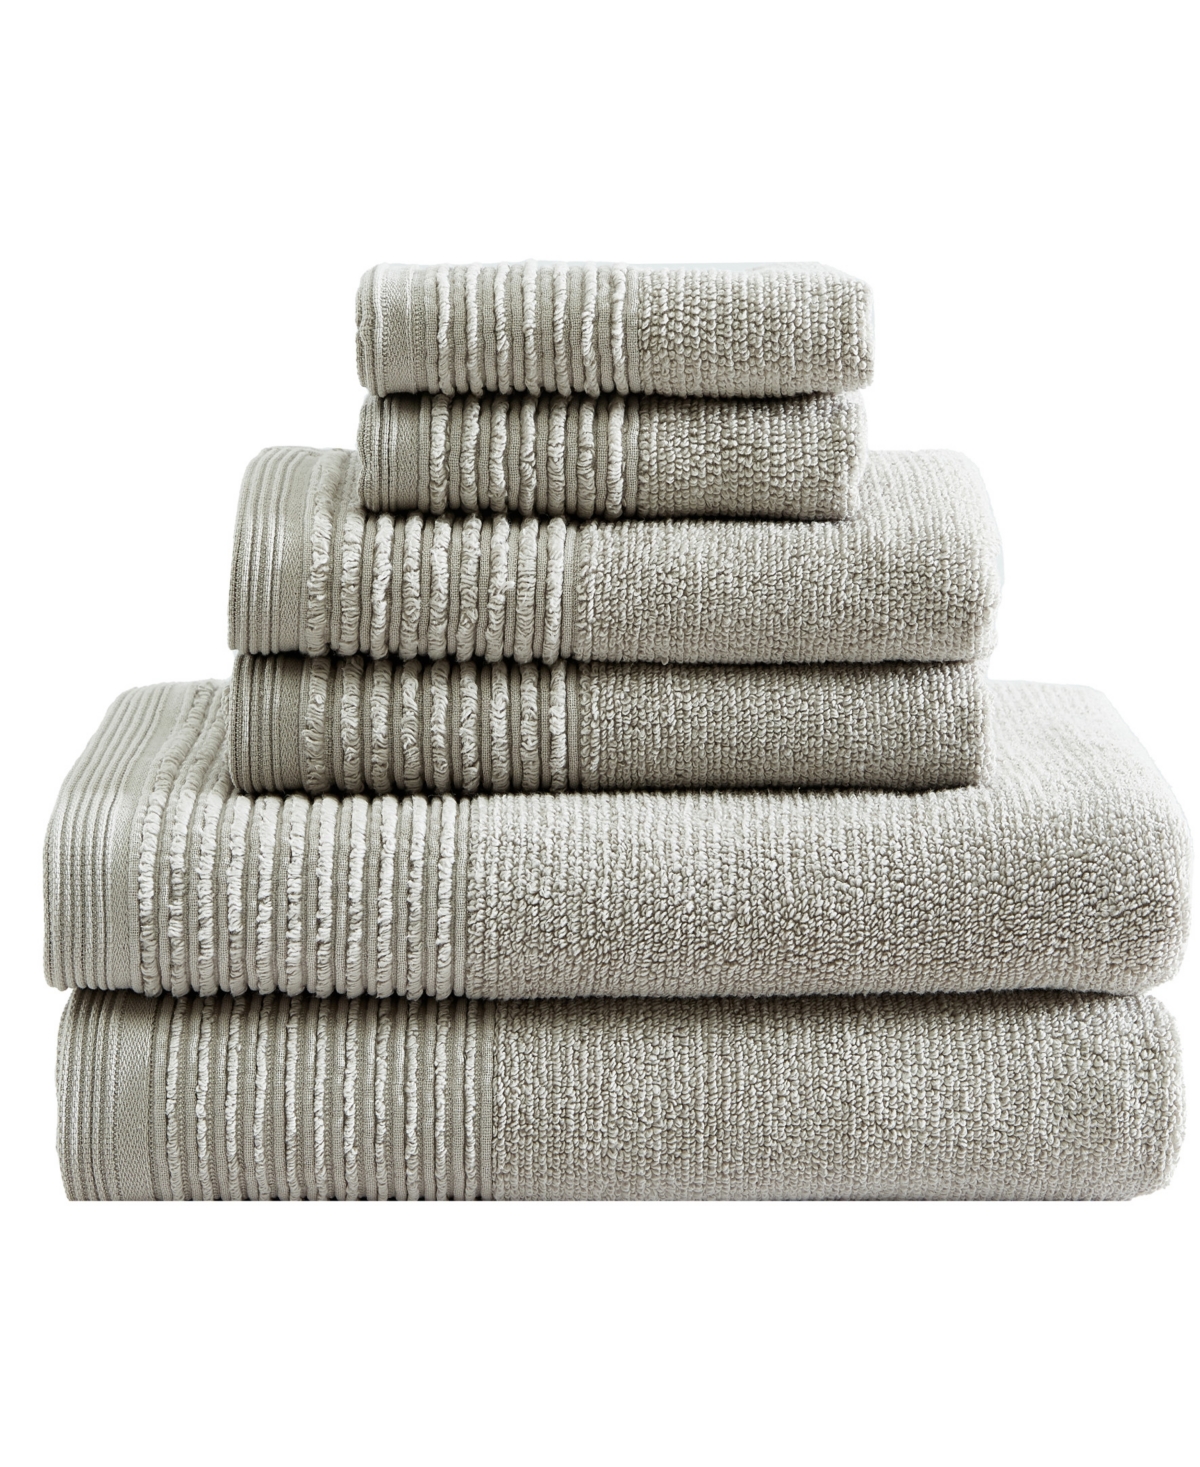 Vera Wang Sculpted Pleat Solid Cotton Terry 6-pc. Bath Towel Set In Pebble Gray